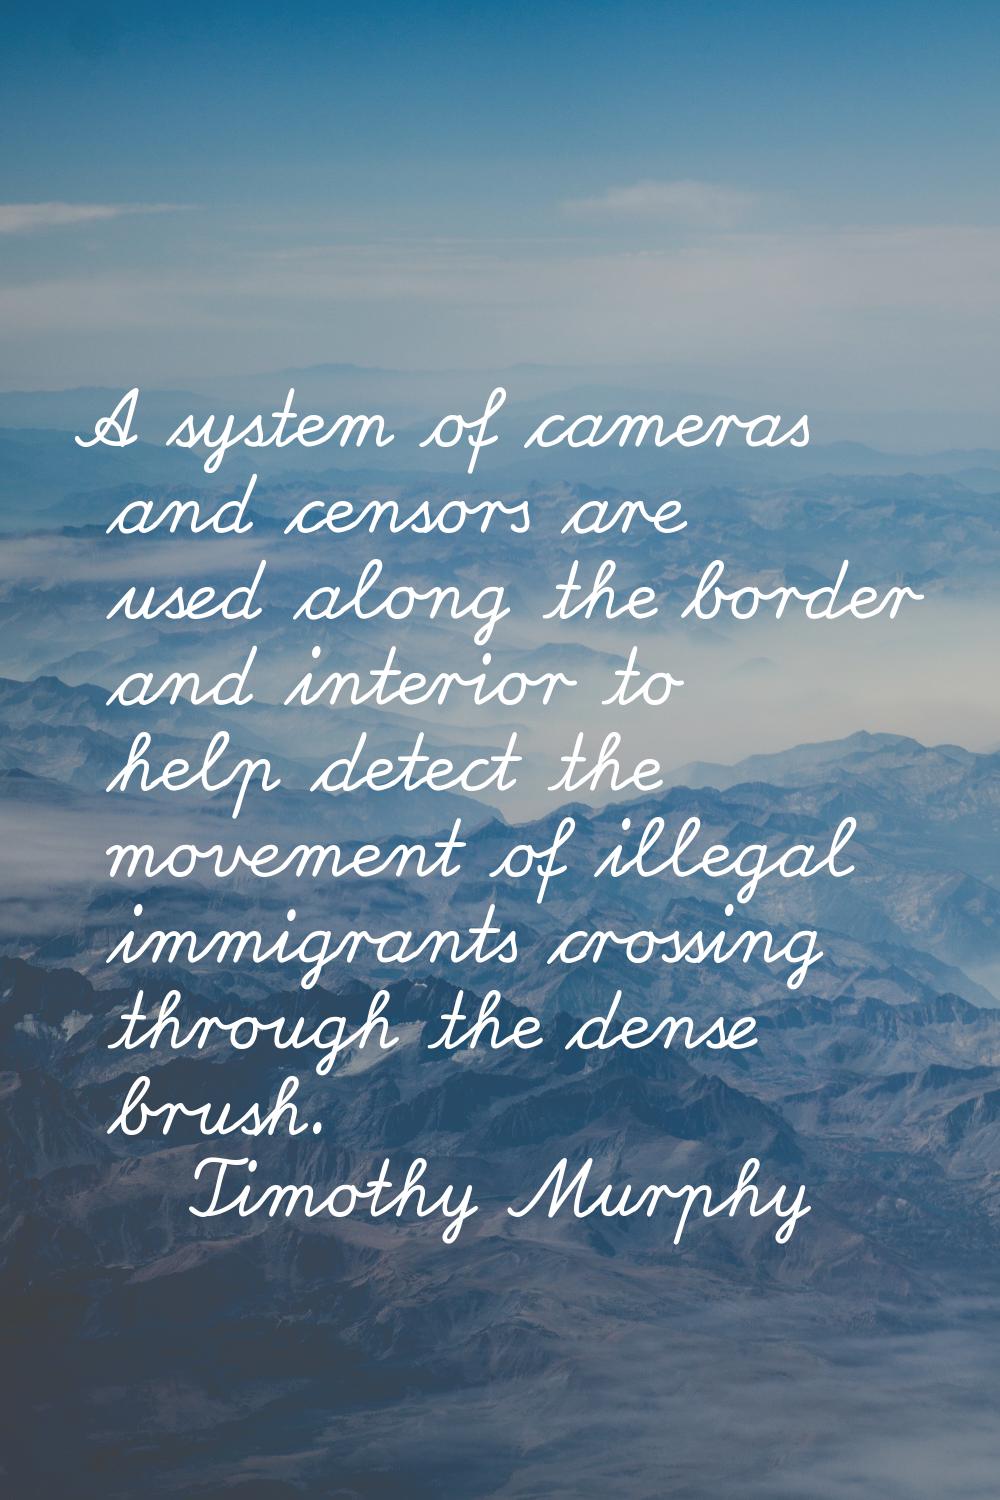 A system of cameras and censors are used along the border and interior to help detect the movement 